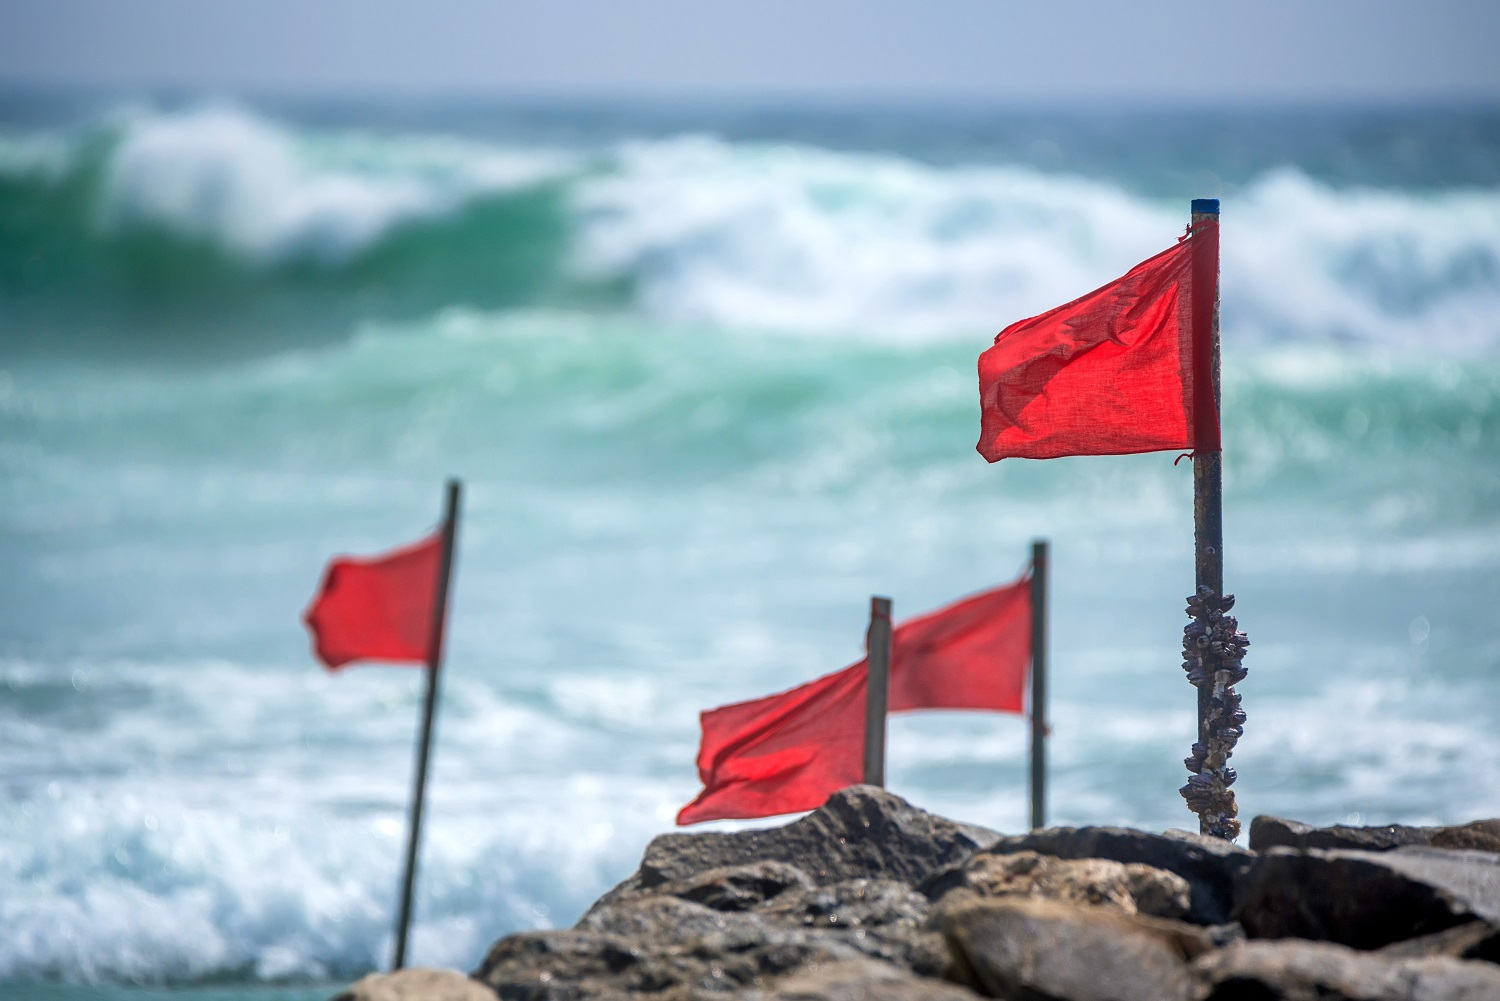 Header image: red flags flying on a beach (credit: Yakov Oskanov)